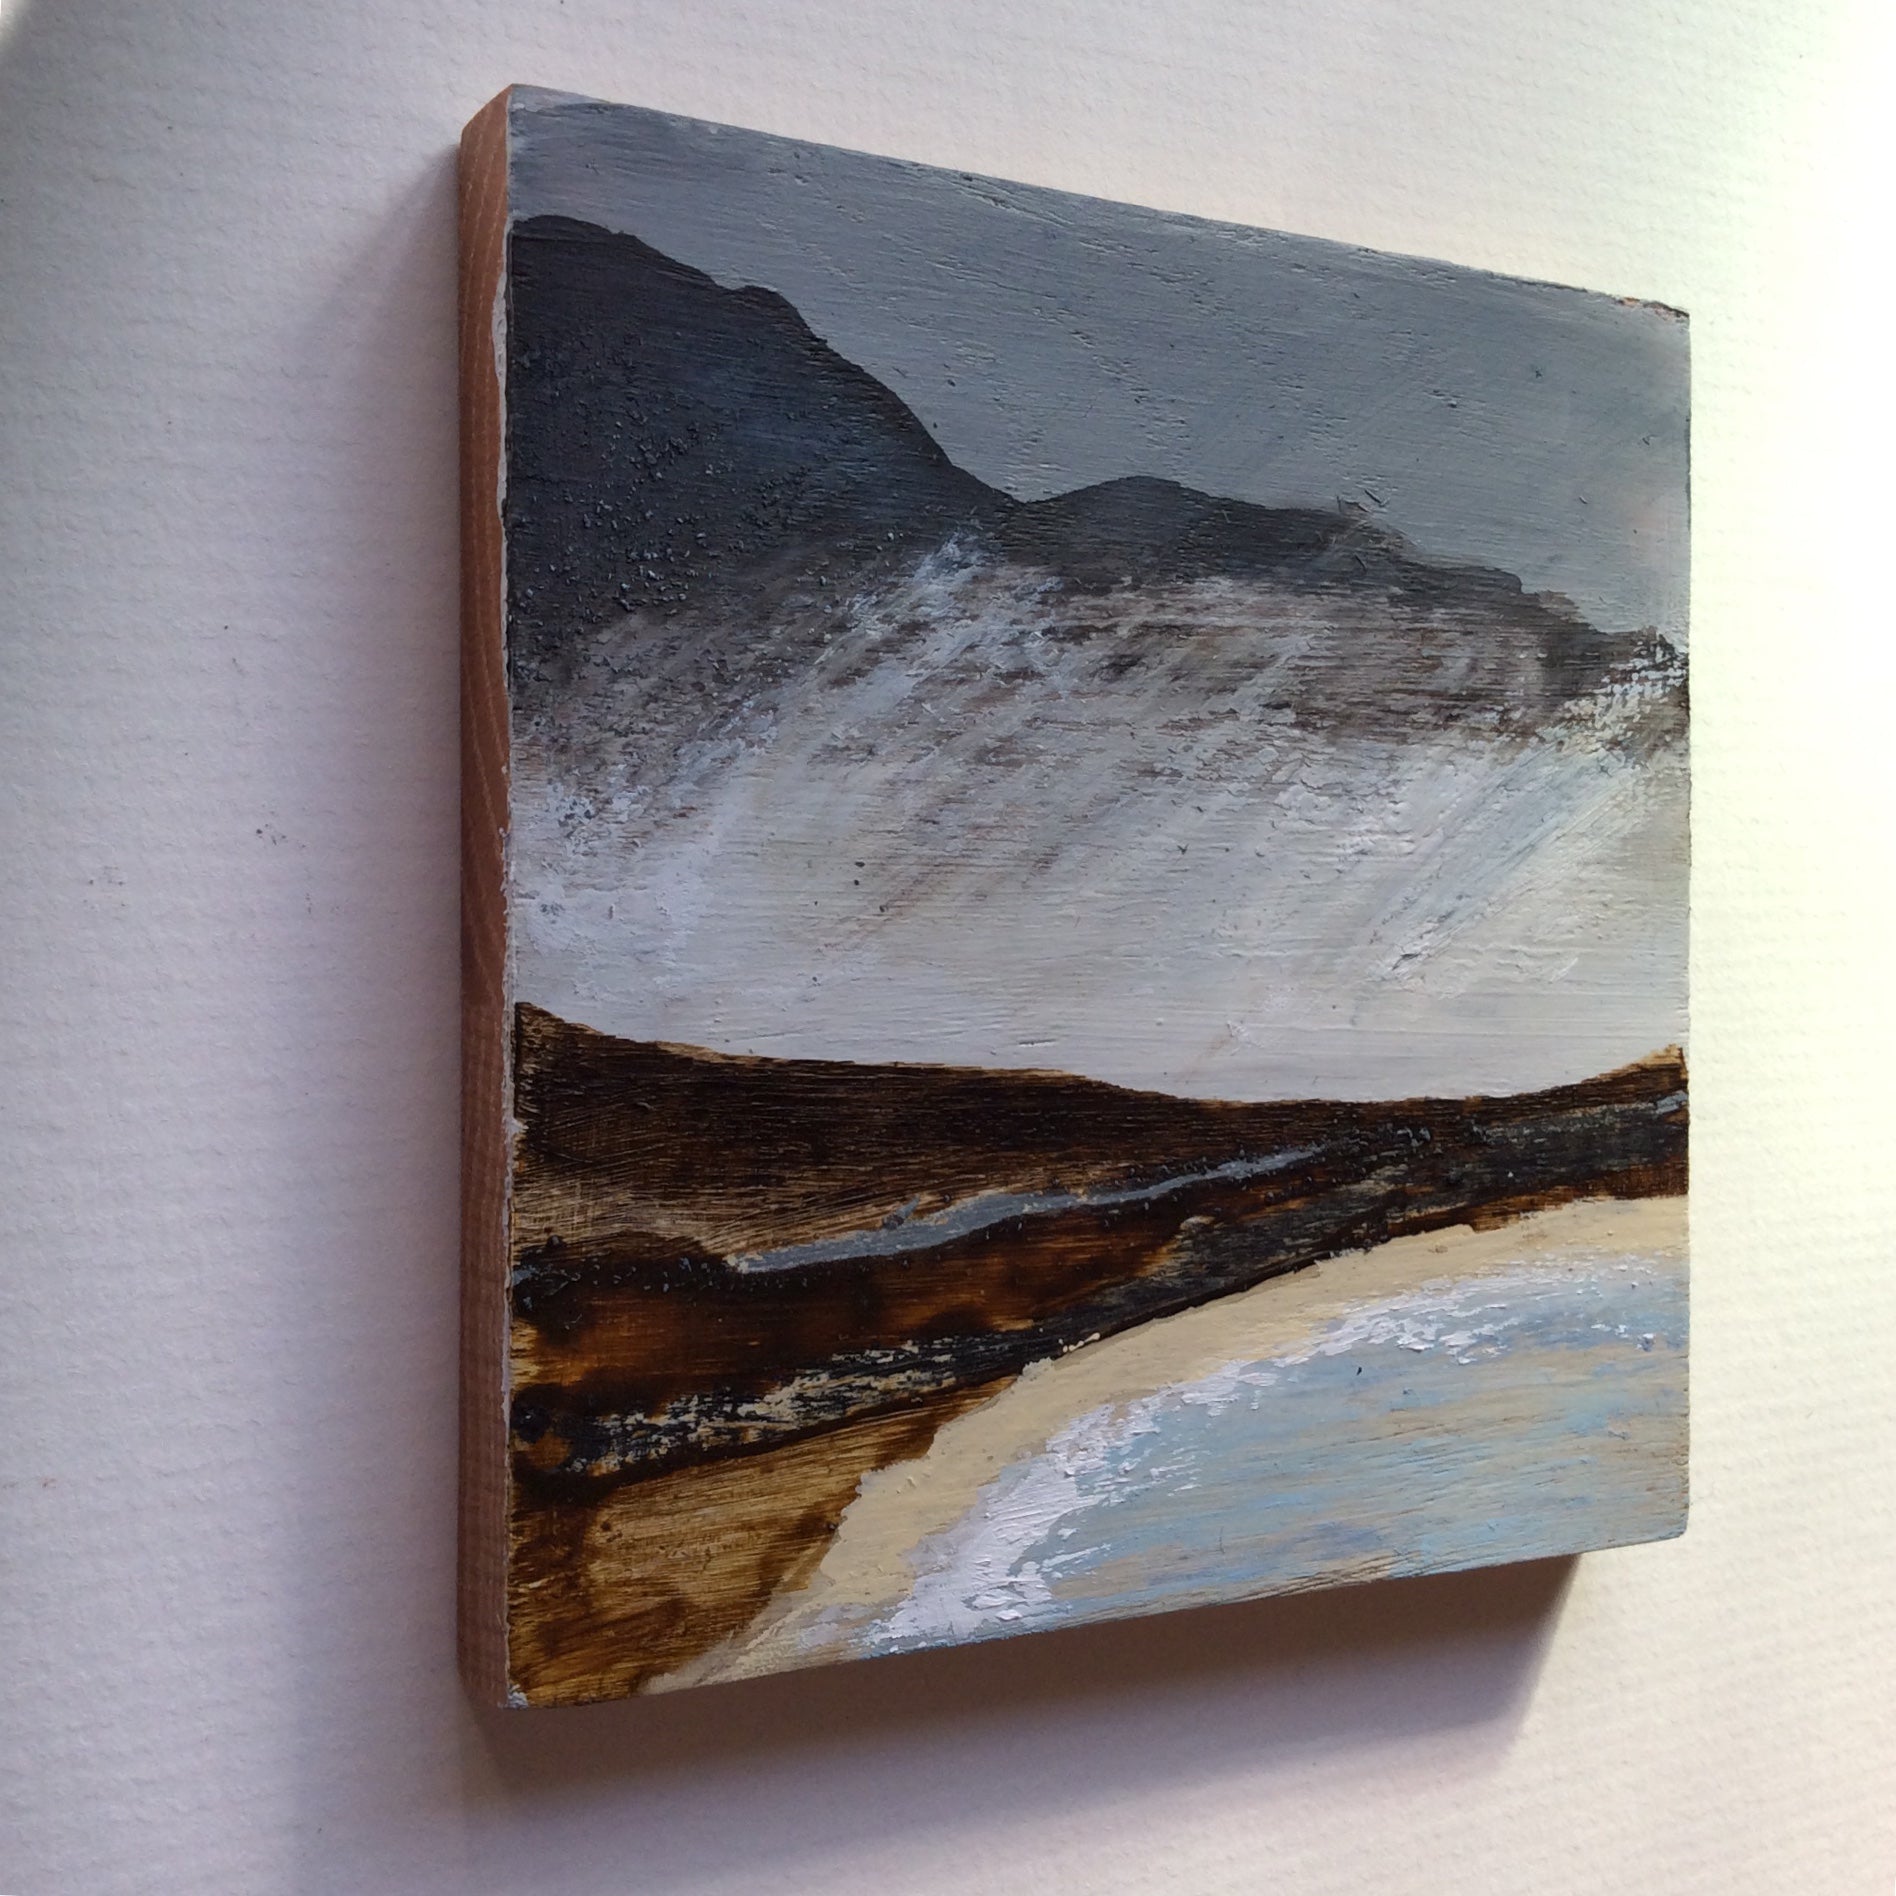 Mixed Media Art on wood By Louise O'Hara - "Storm on the headland”